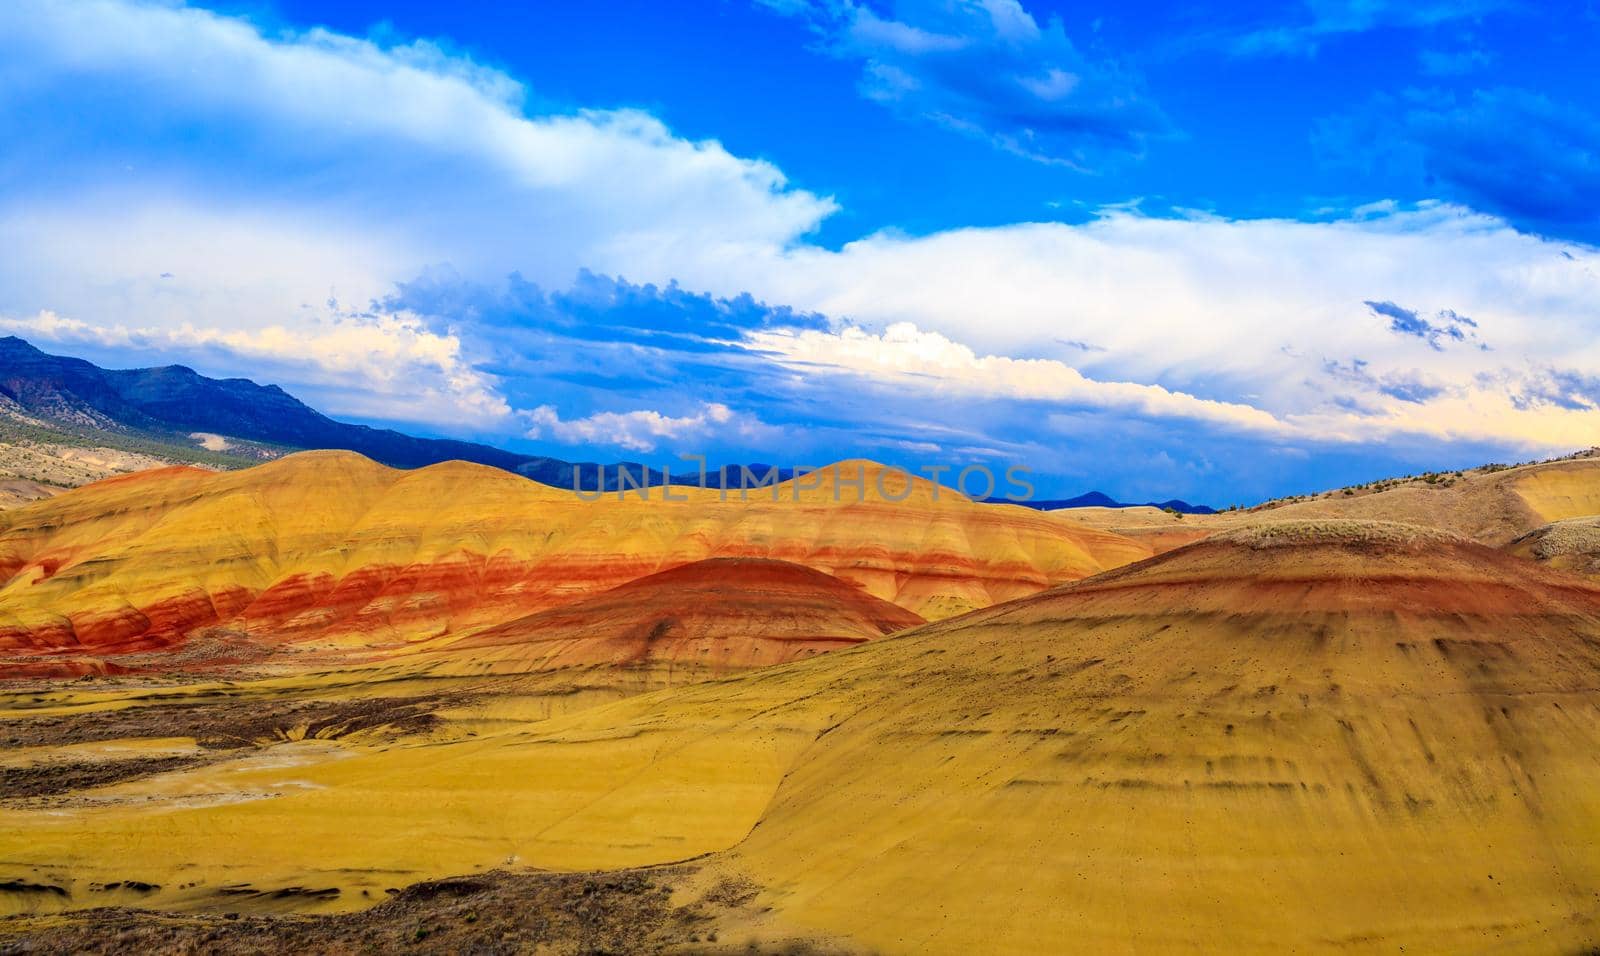 Colorful painted hills at John Day Fossil Beds National Monument, Oregon.